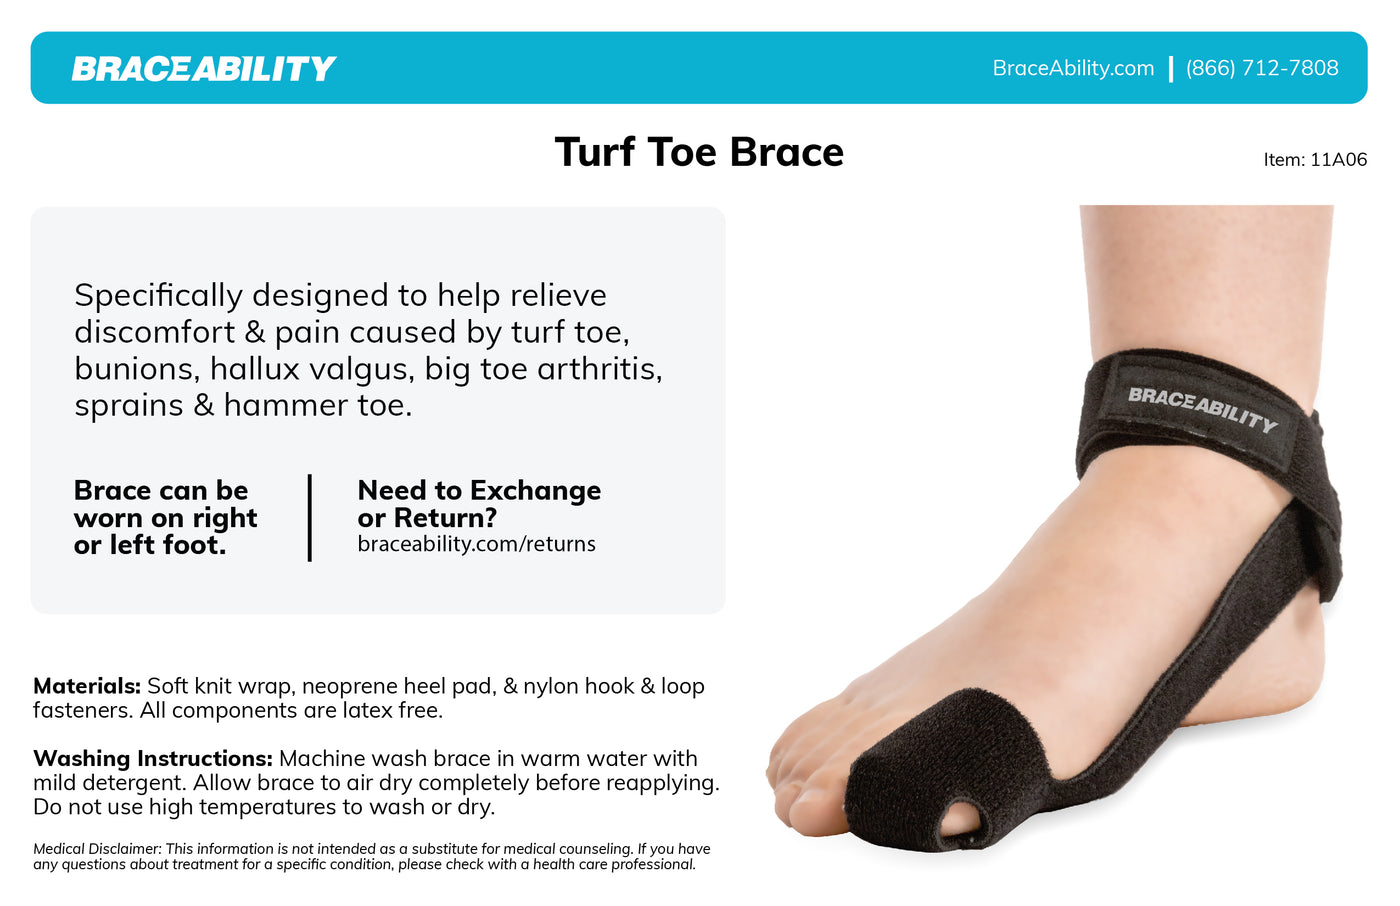 The braceability turf toe is machine washable, wash in warm water then hang to air dry